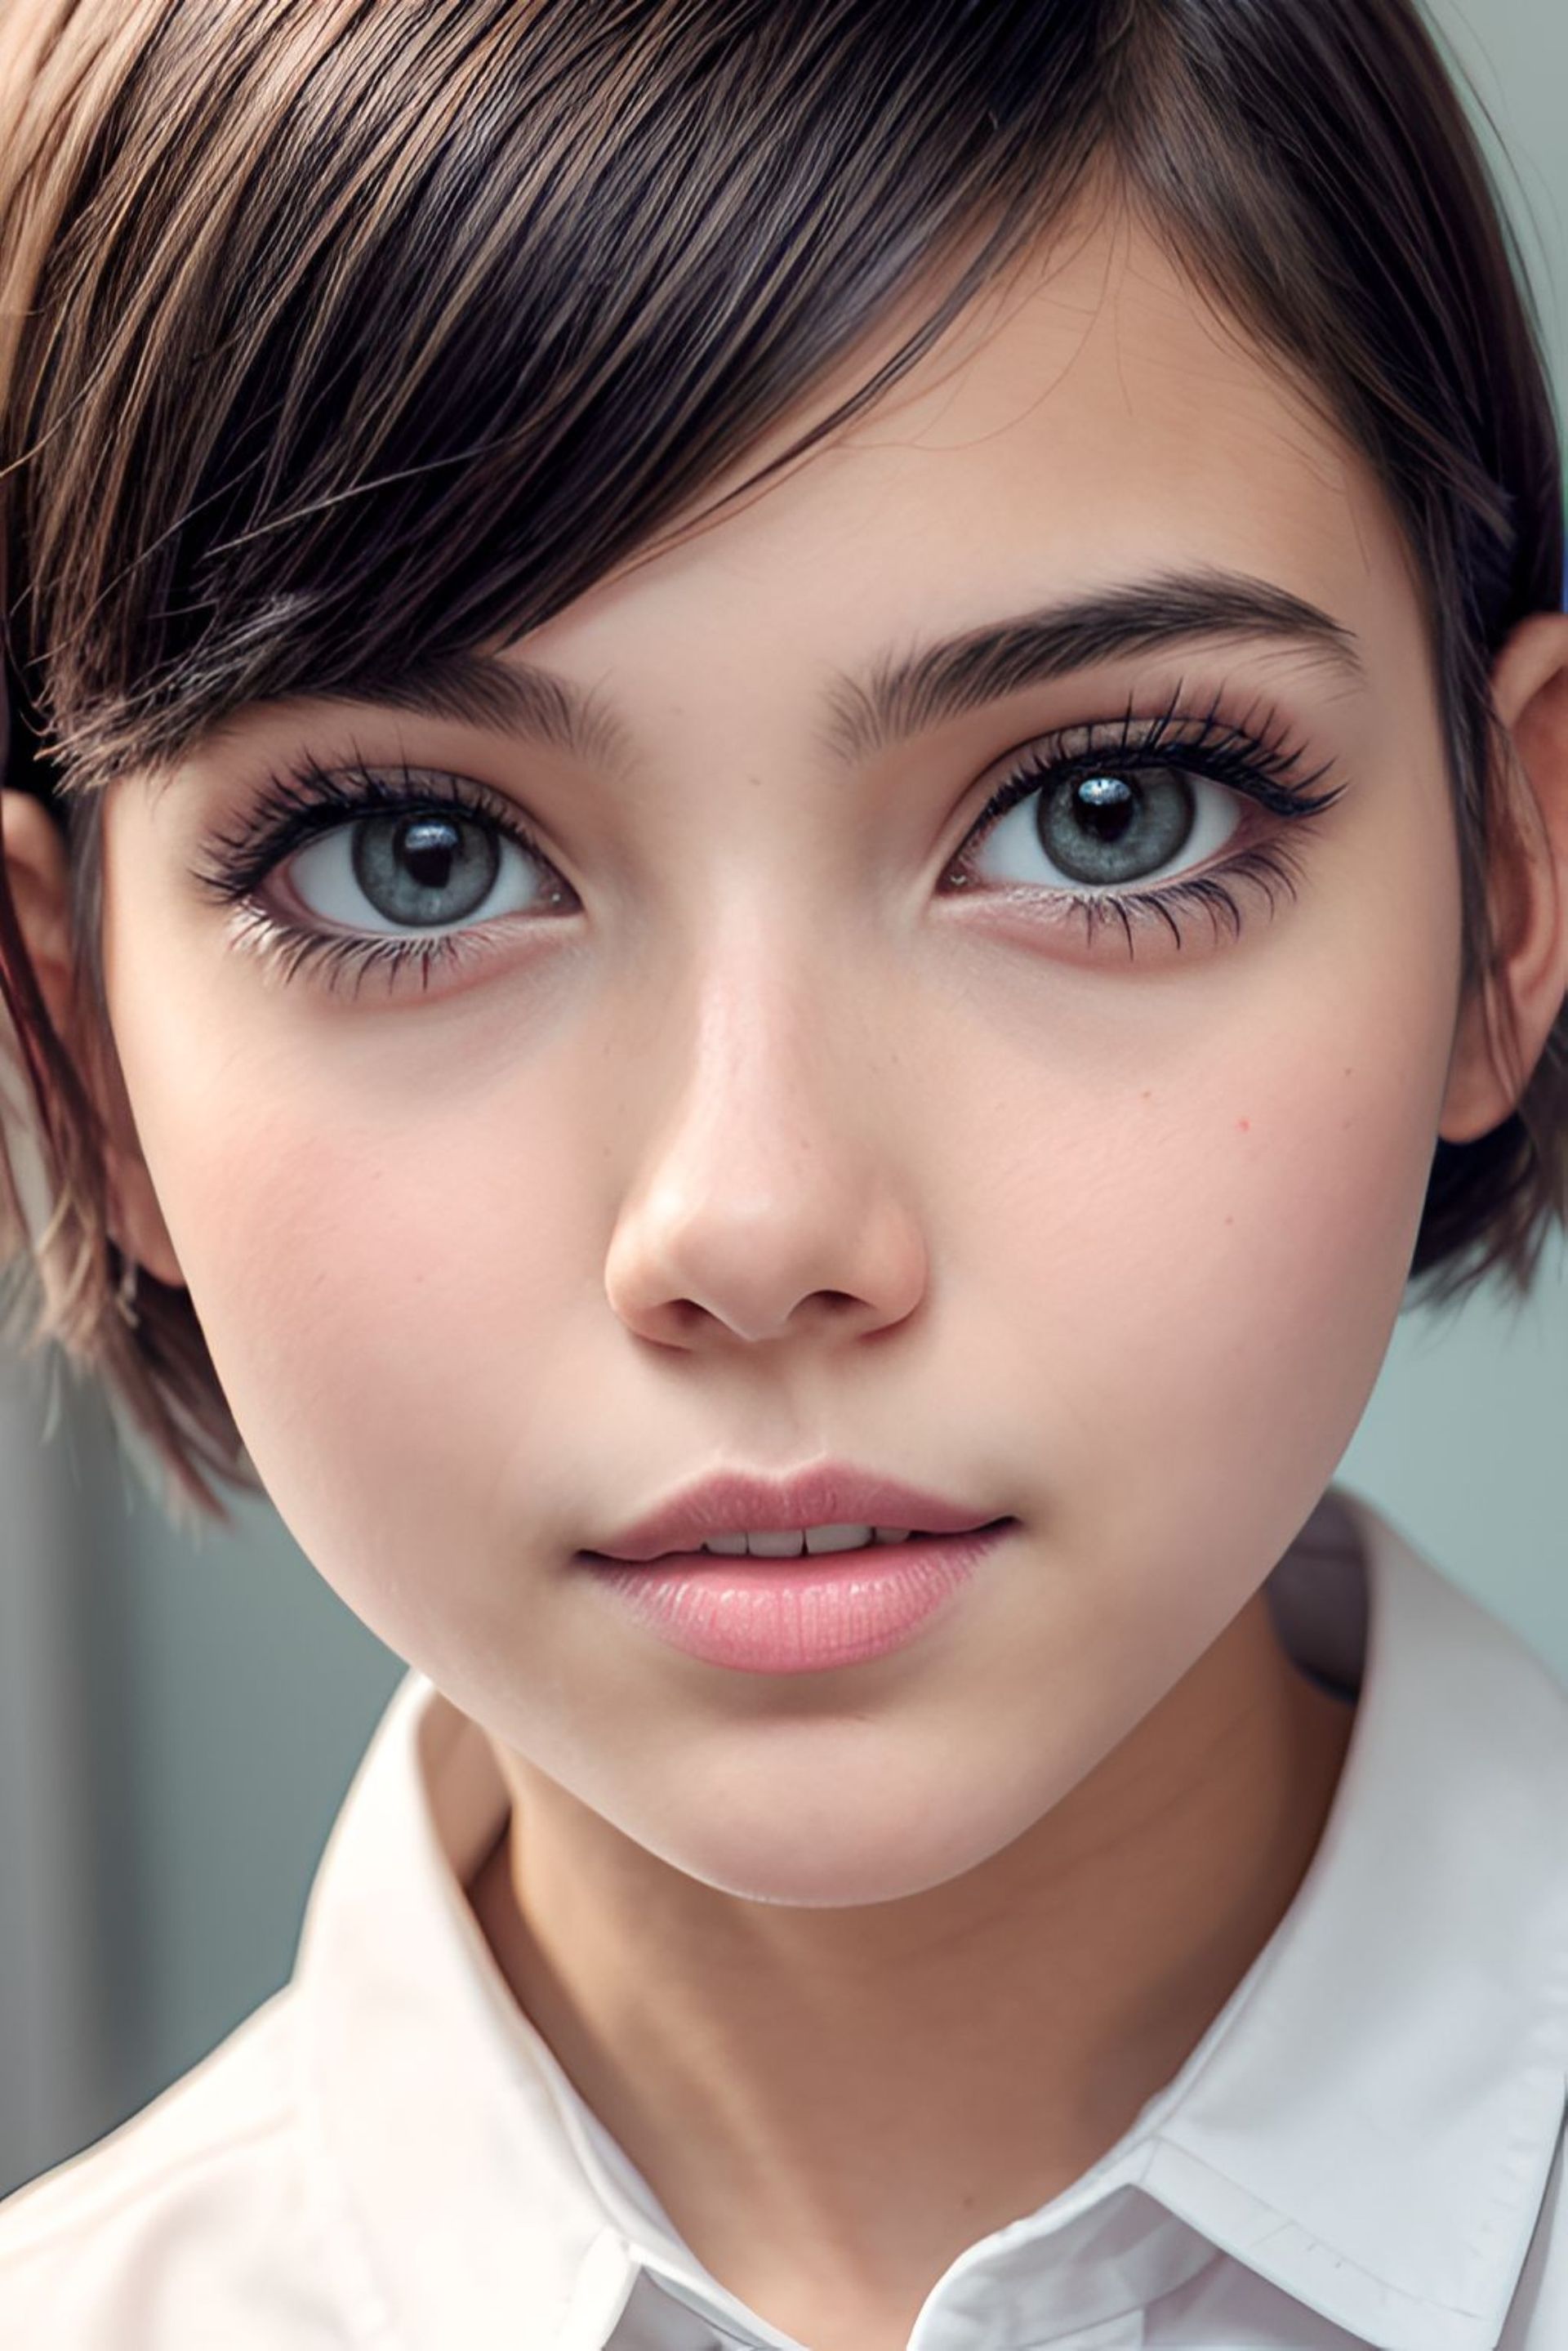 Free photo Beautiful girl, with big eyes, in white blouse, photo